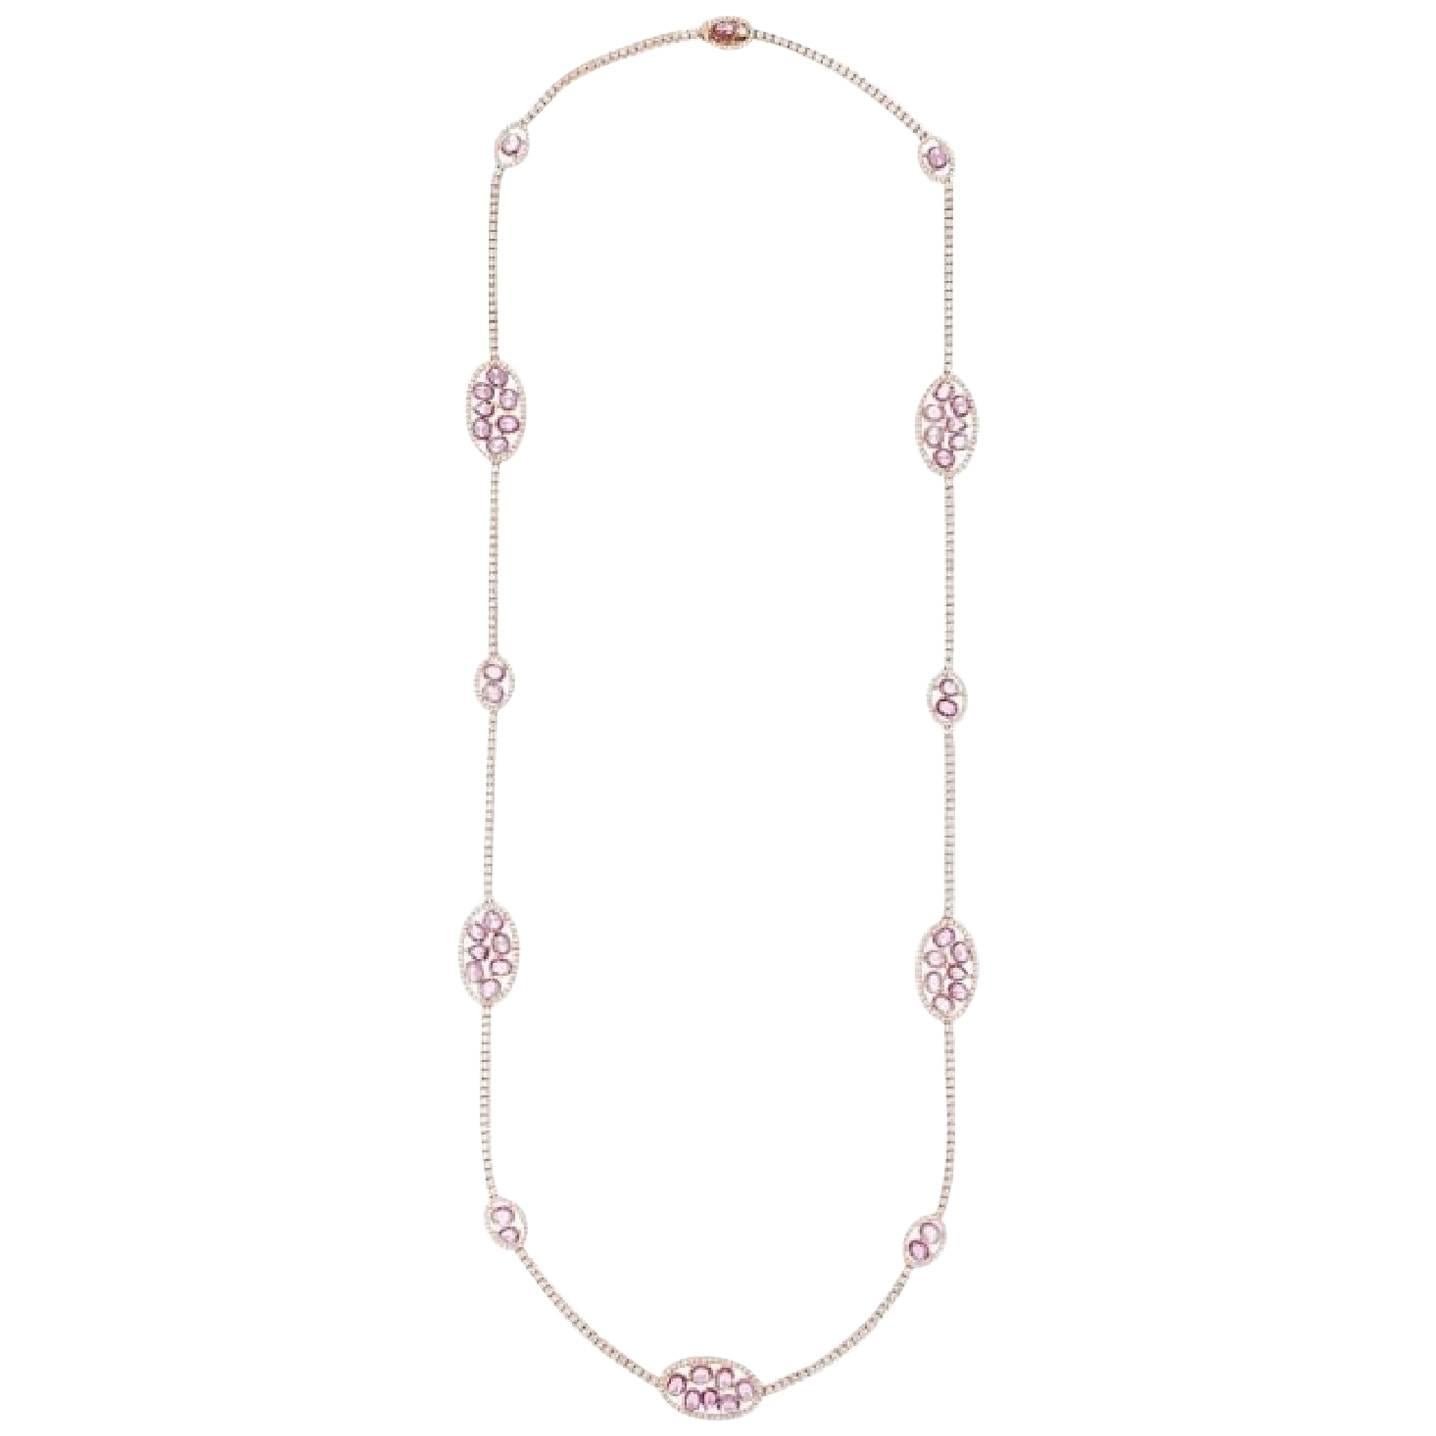 Diana M Jewels 15.00 Carat Pink Sapphire and Diamond Riviera Necklace For Sale